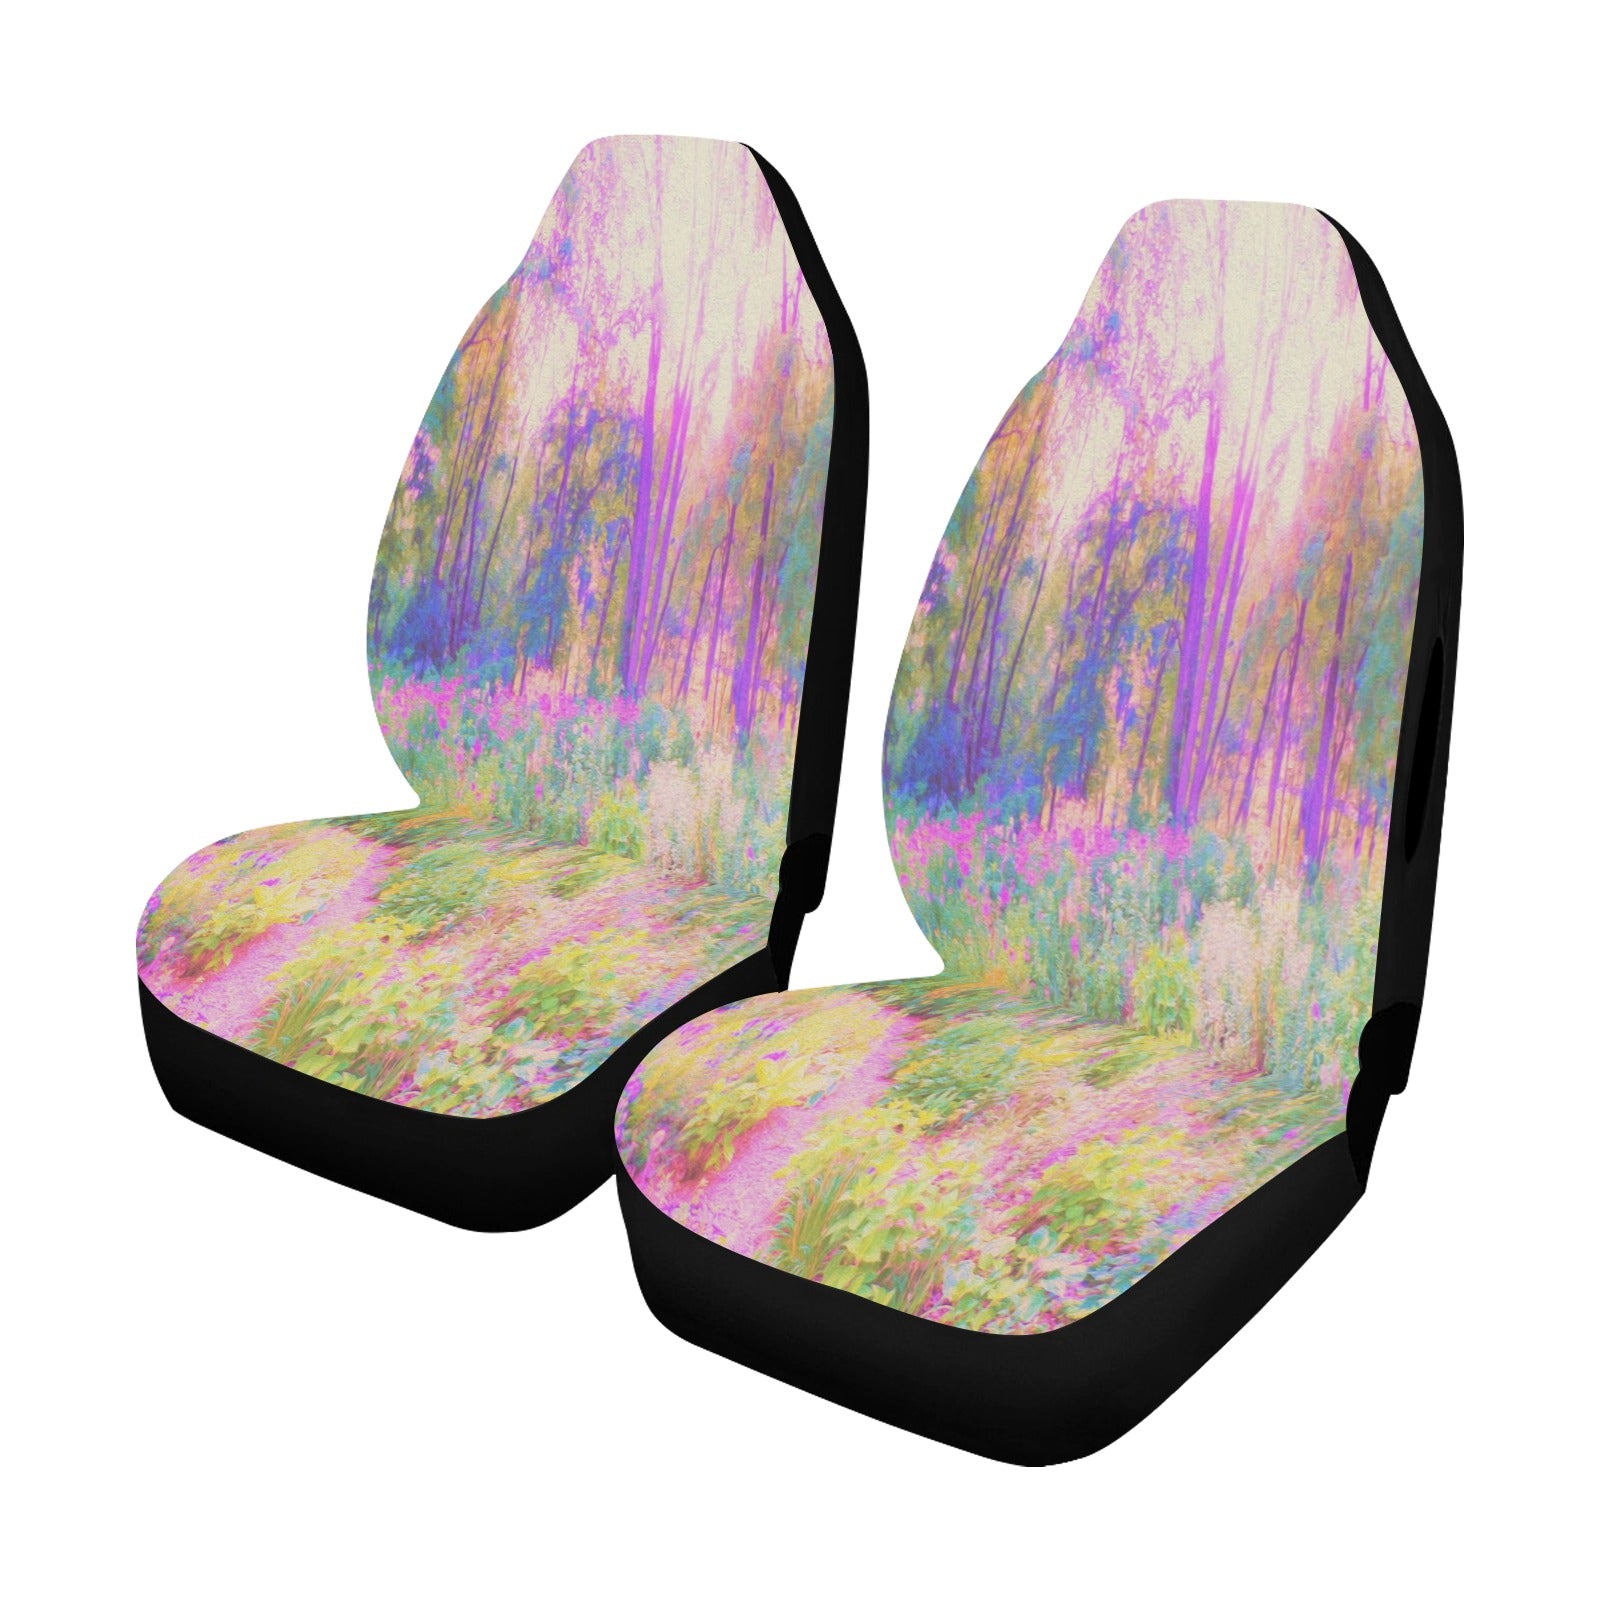 Car Seat Covers, Illuminated Pink and Coral Impressionistic Landscape